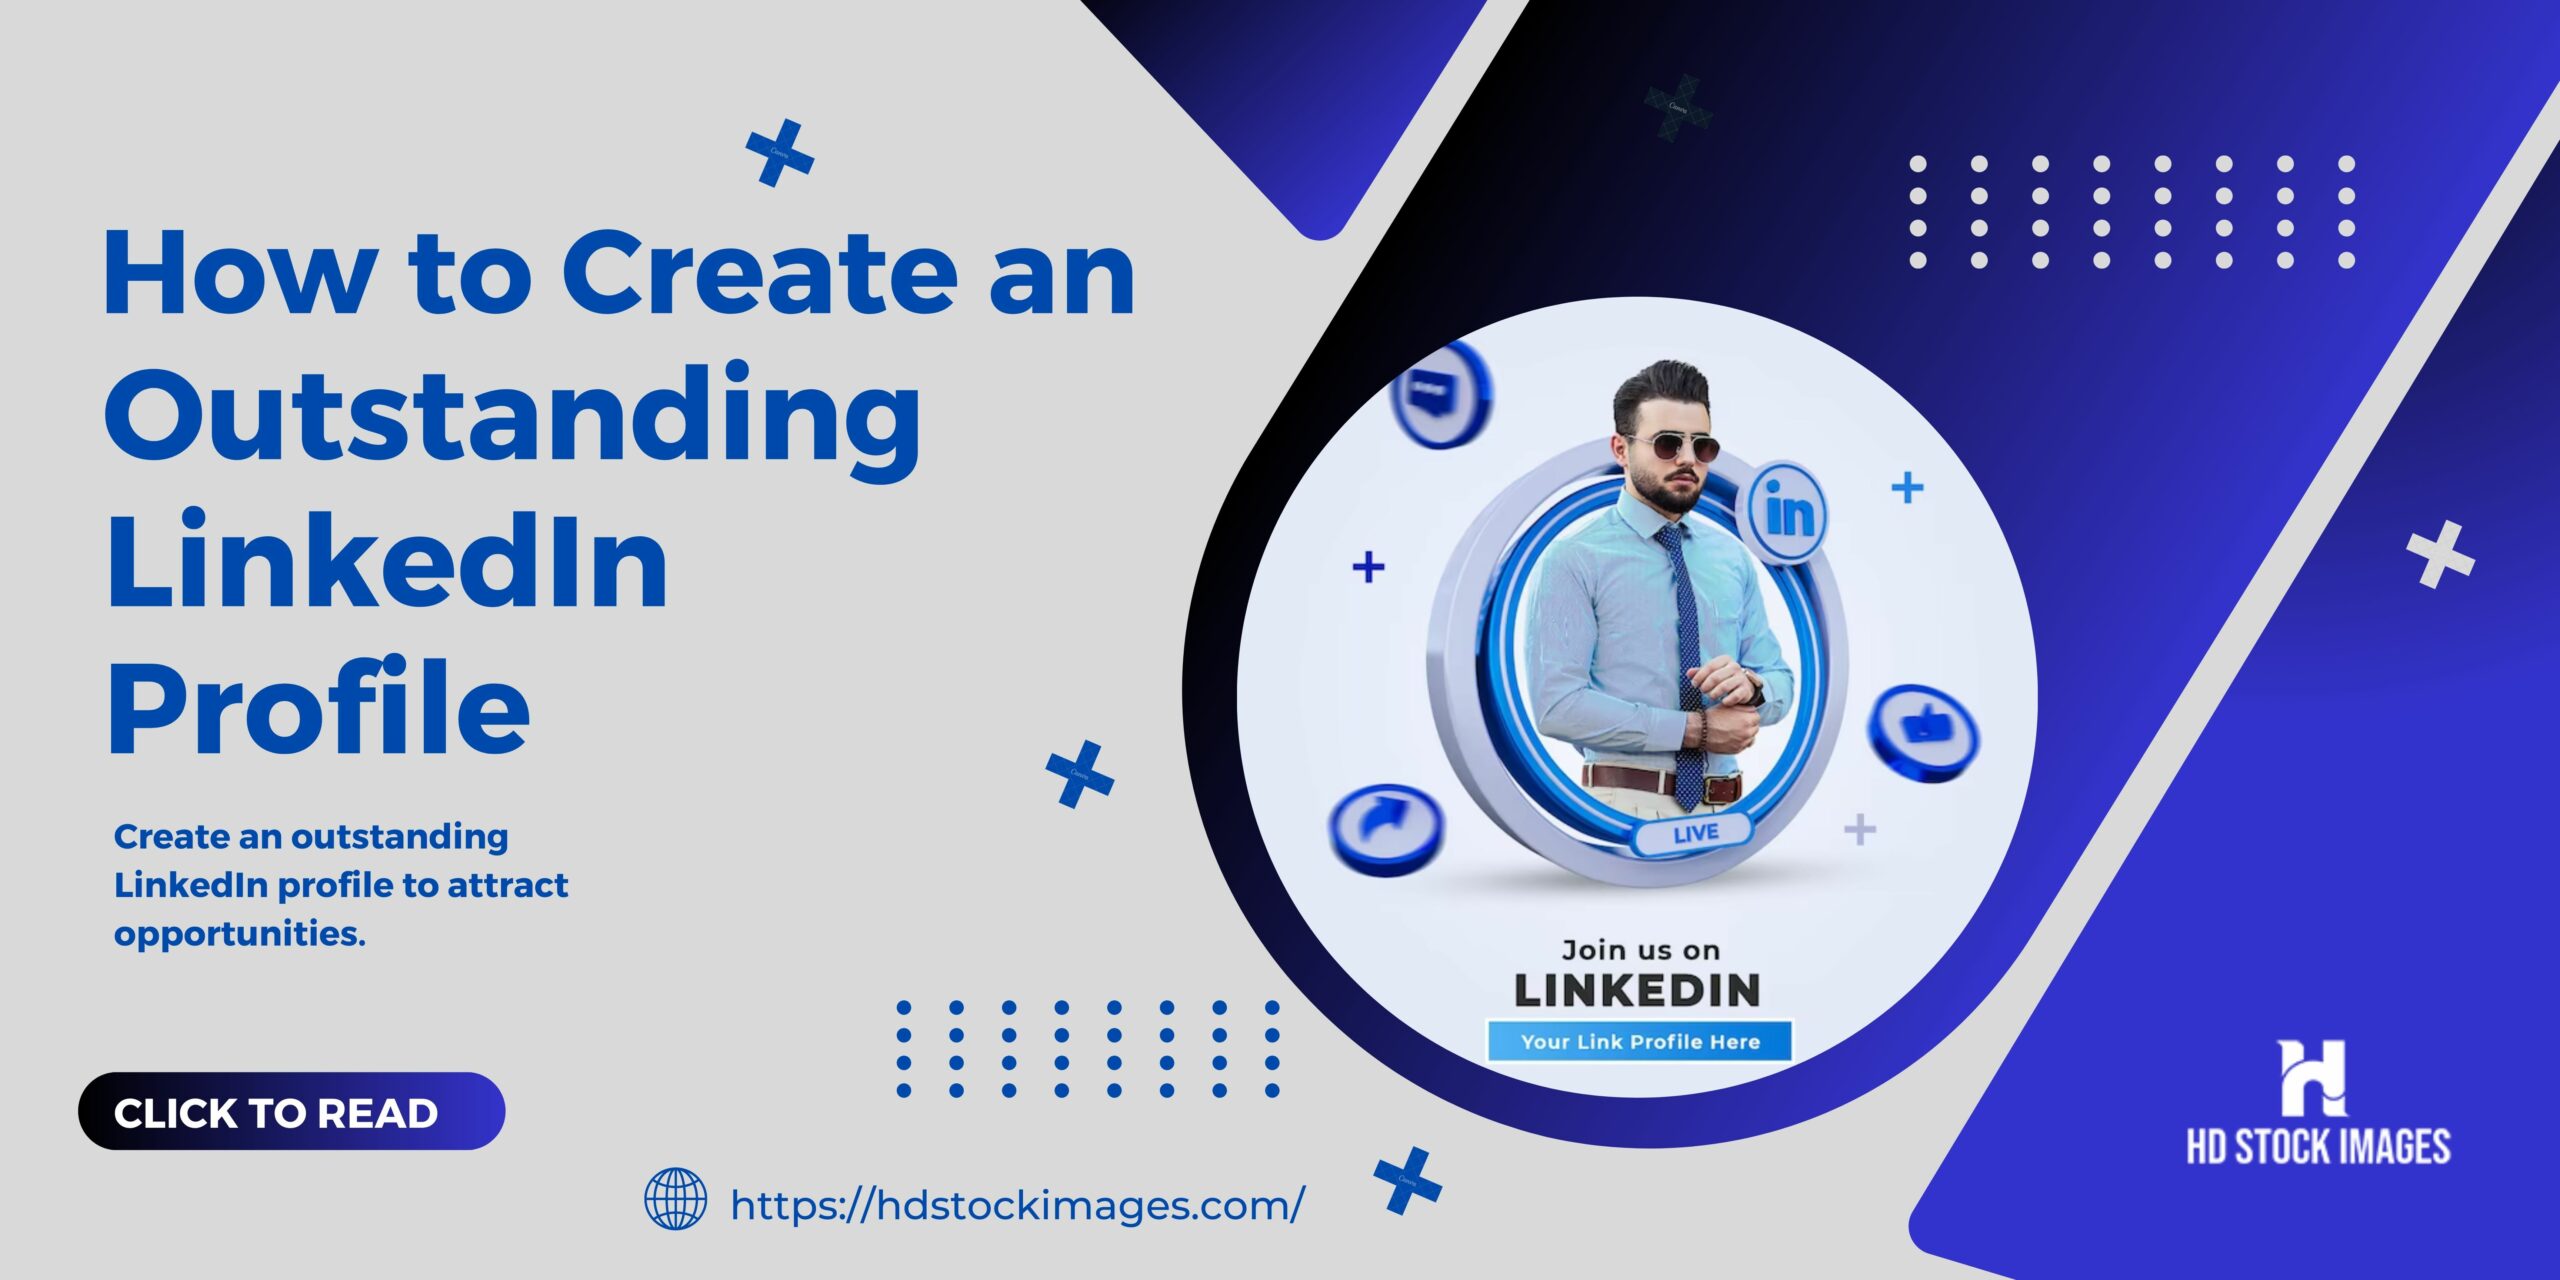 How to Create an Outstanding LinkedIn Profile